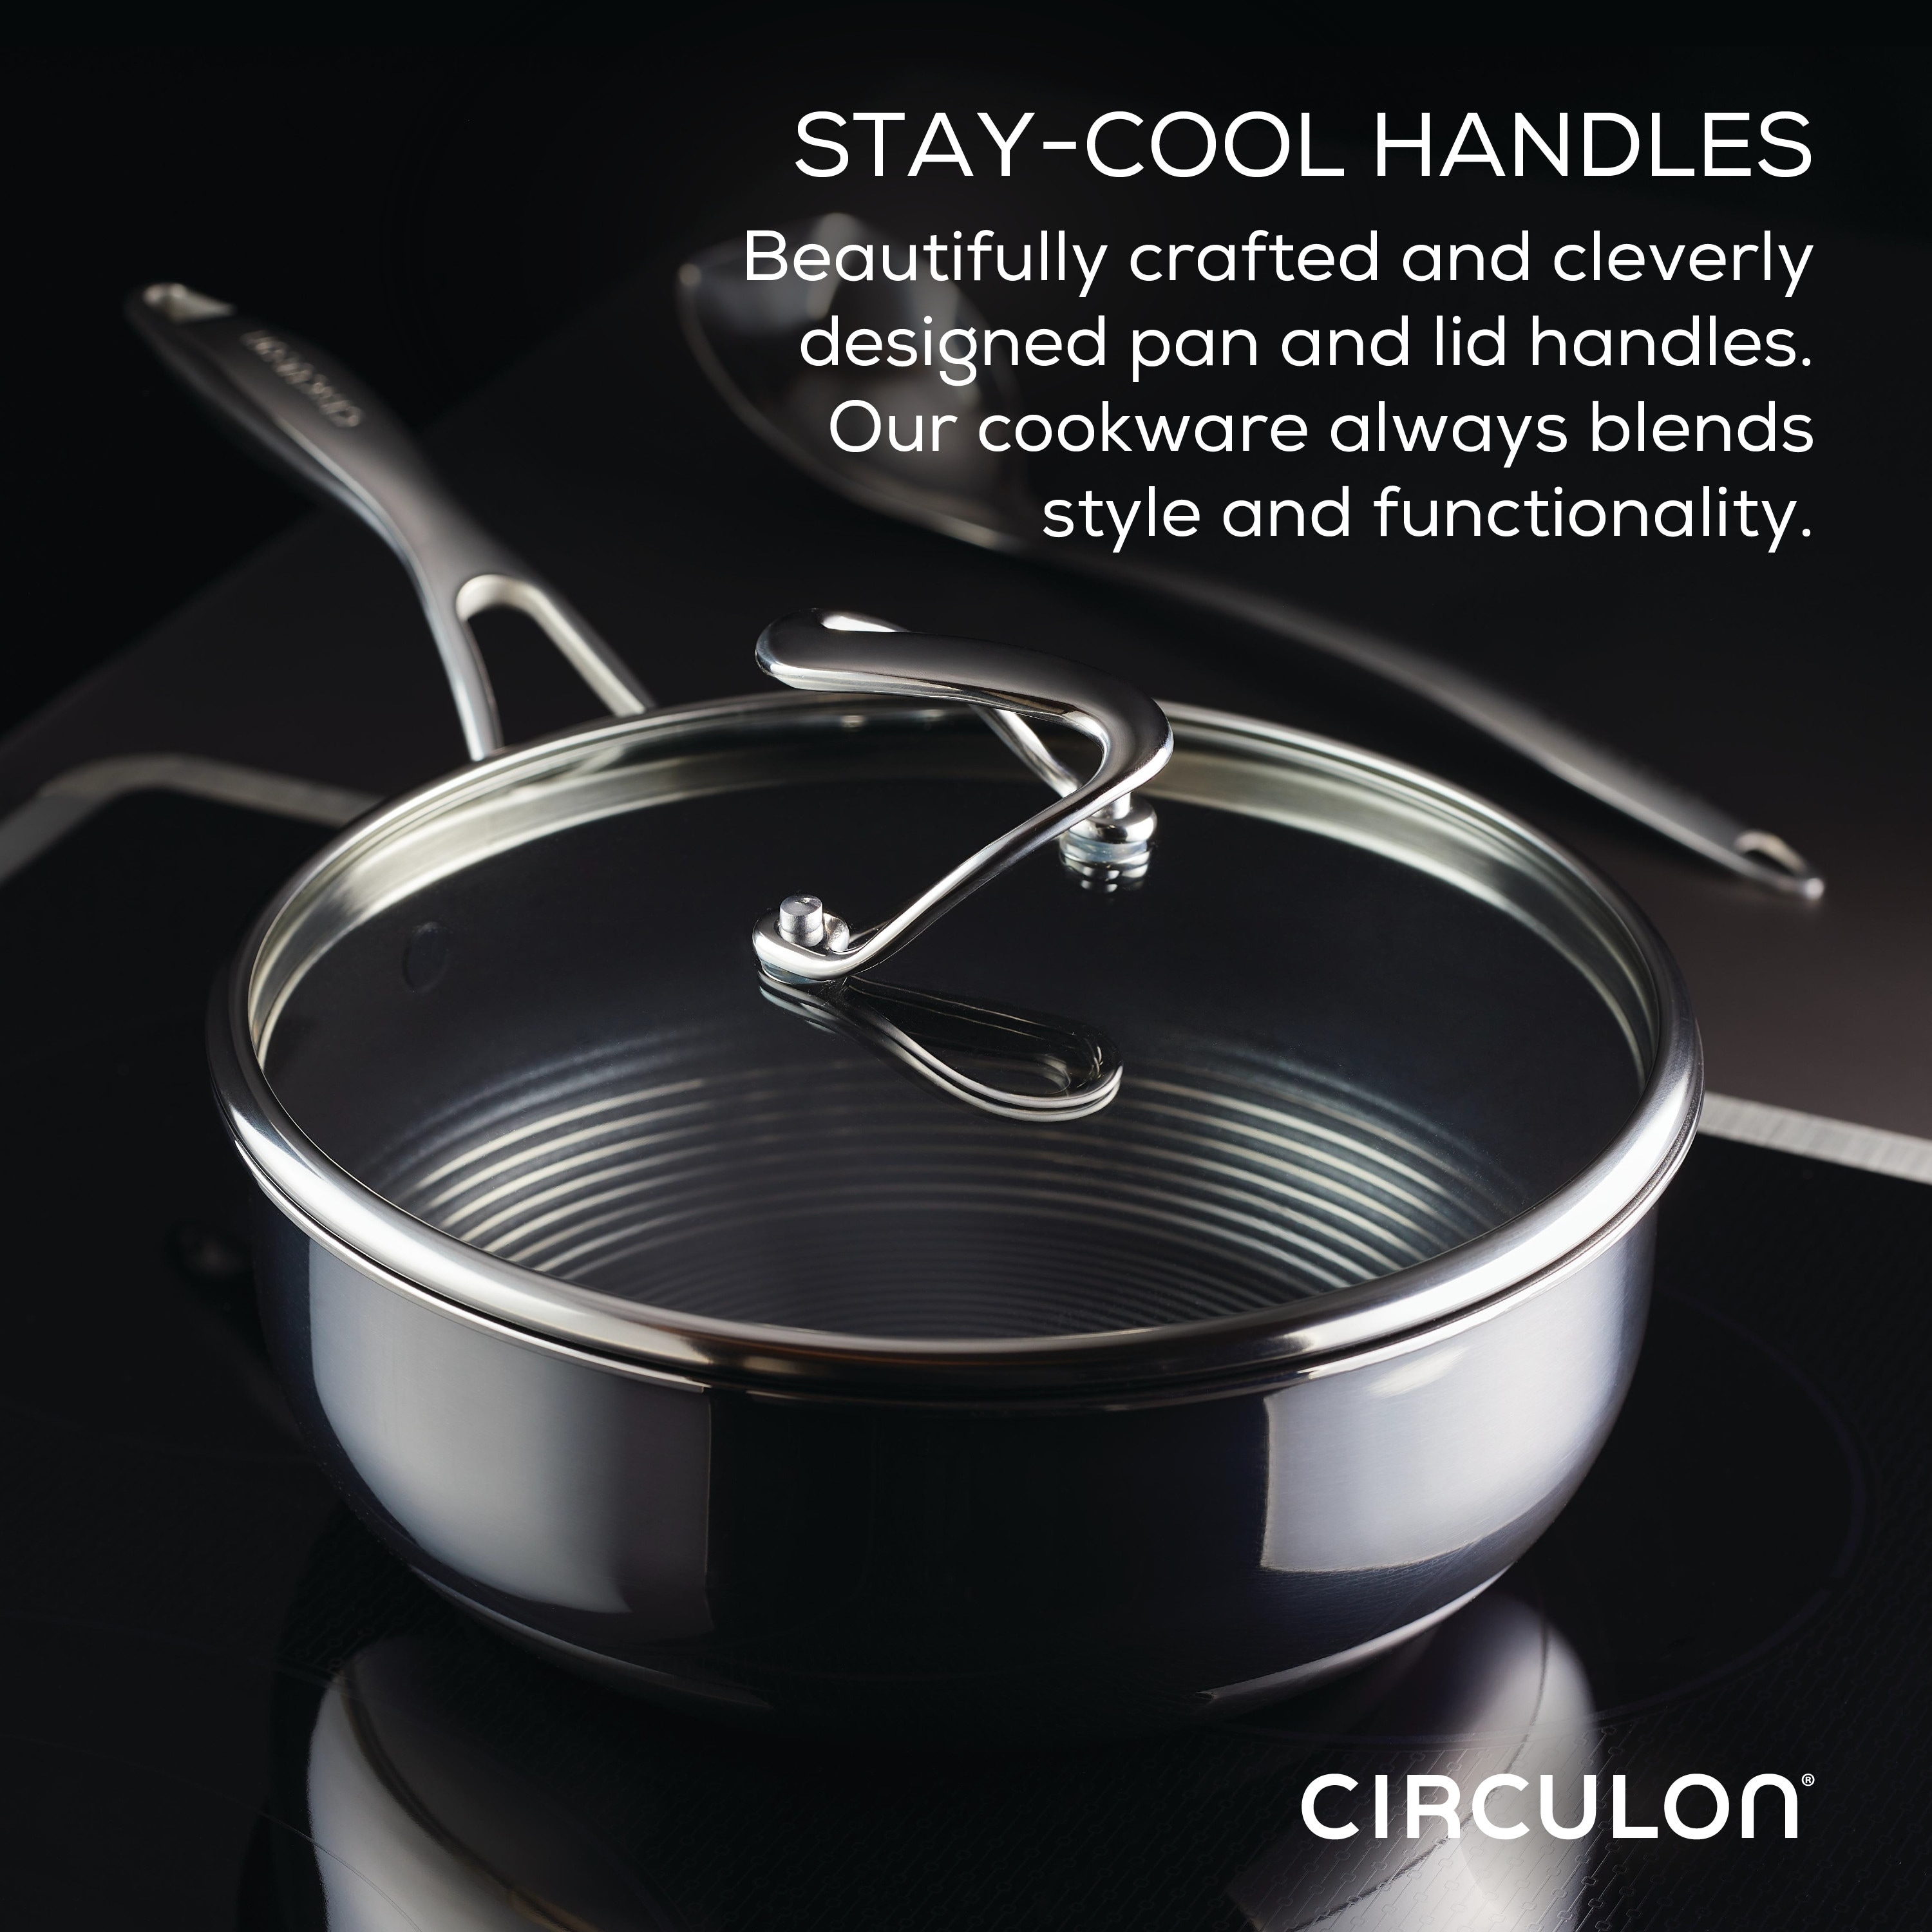 https://ak1.ostkcdn.com/images/products/is/images/direct/71d5849cb1f104e49326868c7f22fc4e94fa78c5/Circulon-Clad-Stainless-Steel-Induction-Chef-Pan-and-Utensil-Set-with-Hybrid-SteelShield-Technology%2C-3-Piece%2C-Silver.jpg